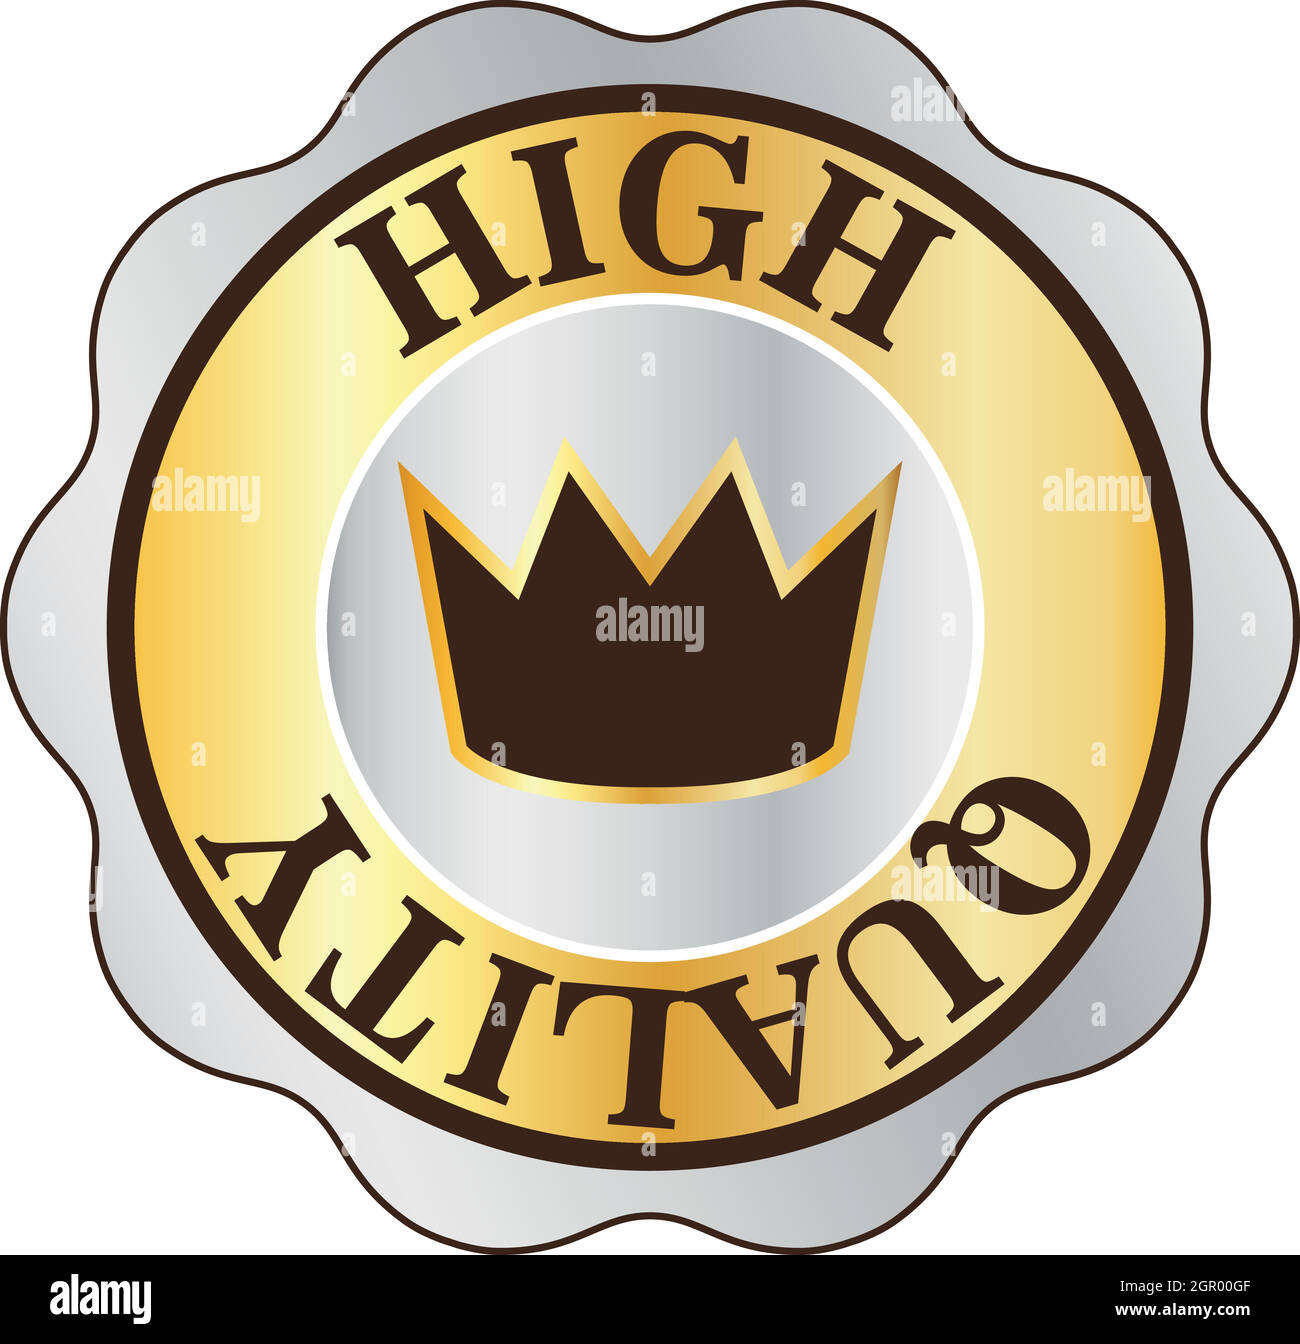 Premium Vector  Gold crown with ribbon winner king or queen